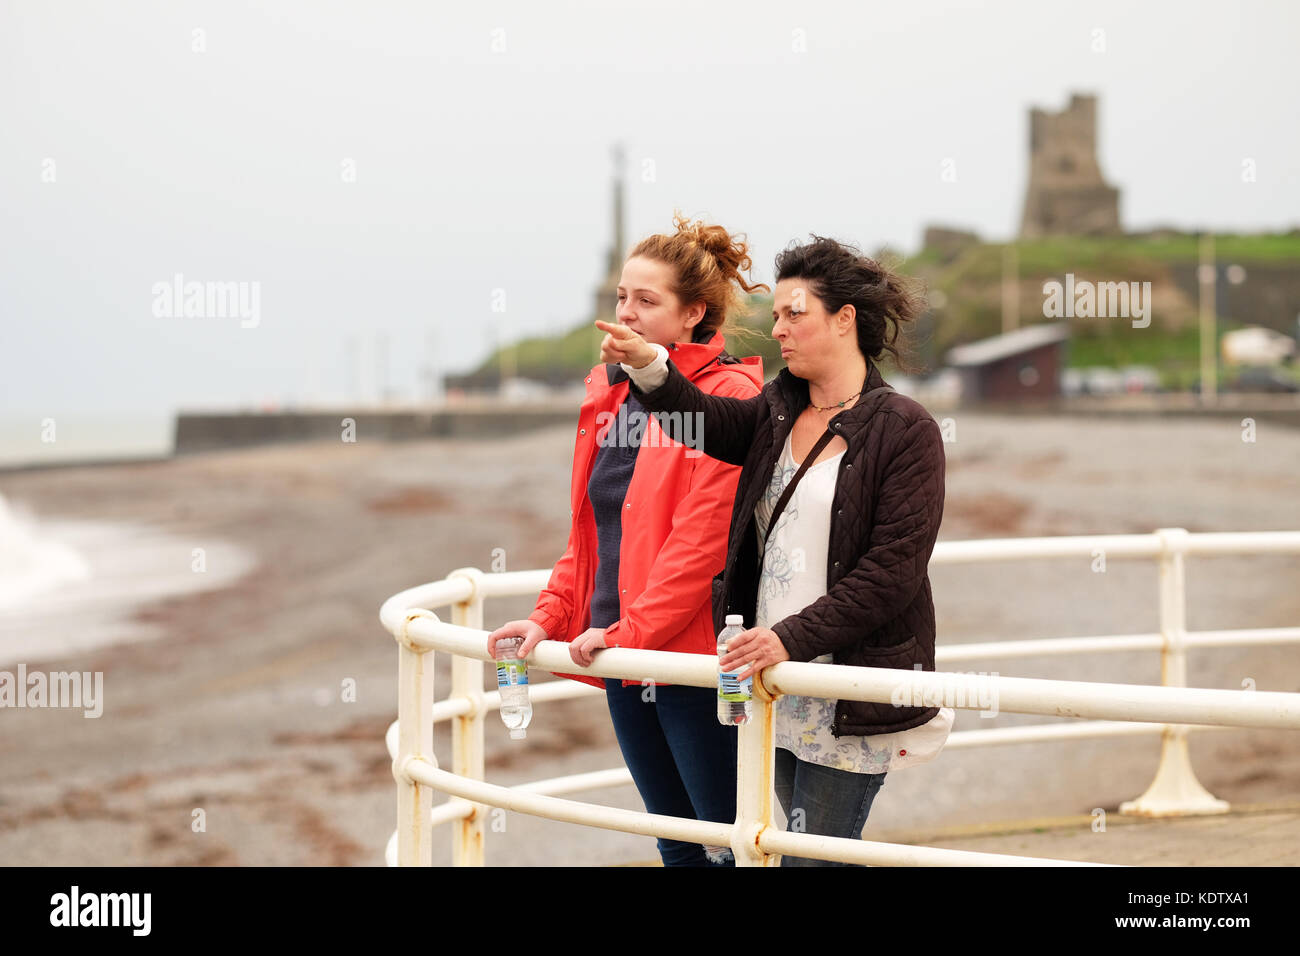 Aberystwyth, Ceredigion, Wales, UK. 16th Oct, 2017. UK Weather. Strong winds picking up on the West Wales coast at Aberystwyth as Storm Ophelia approaches - local residents Louise and Brogan watch as the storm comes in off the Irish Sea. Credit: Steven May/Alamy Live News Stock Photo